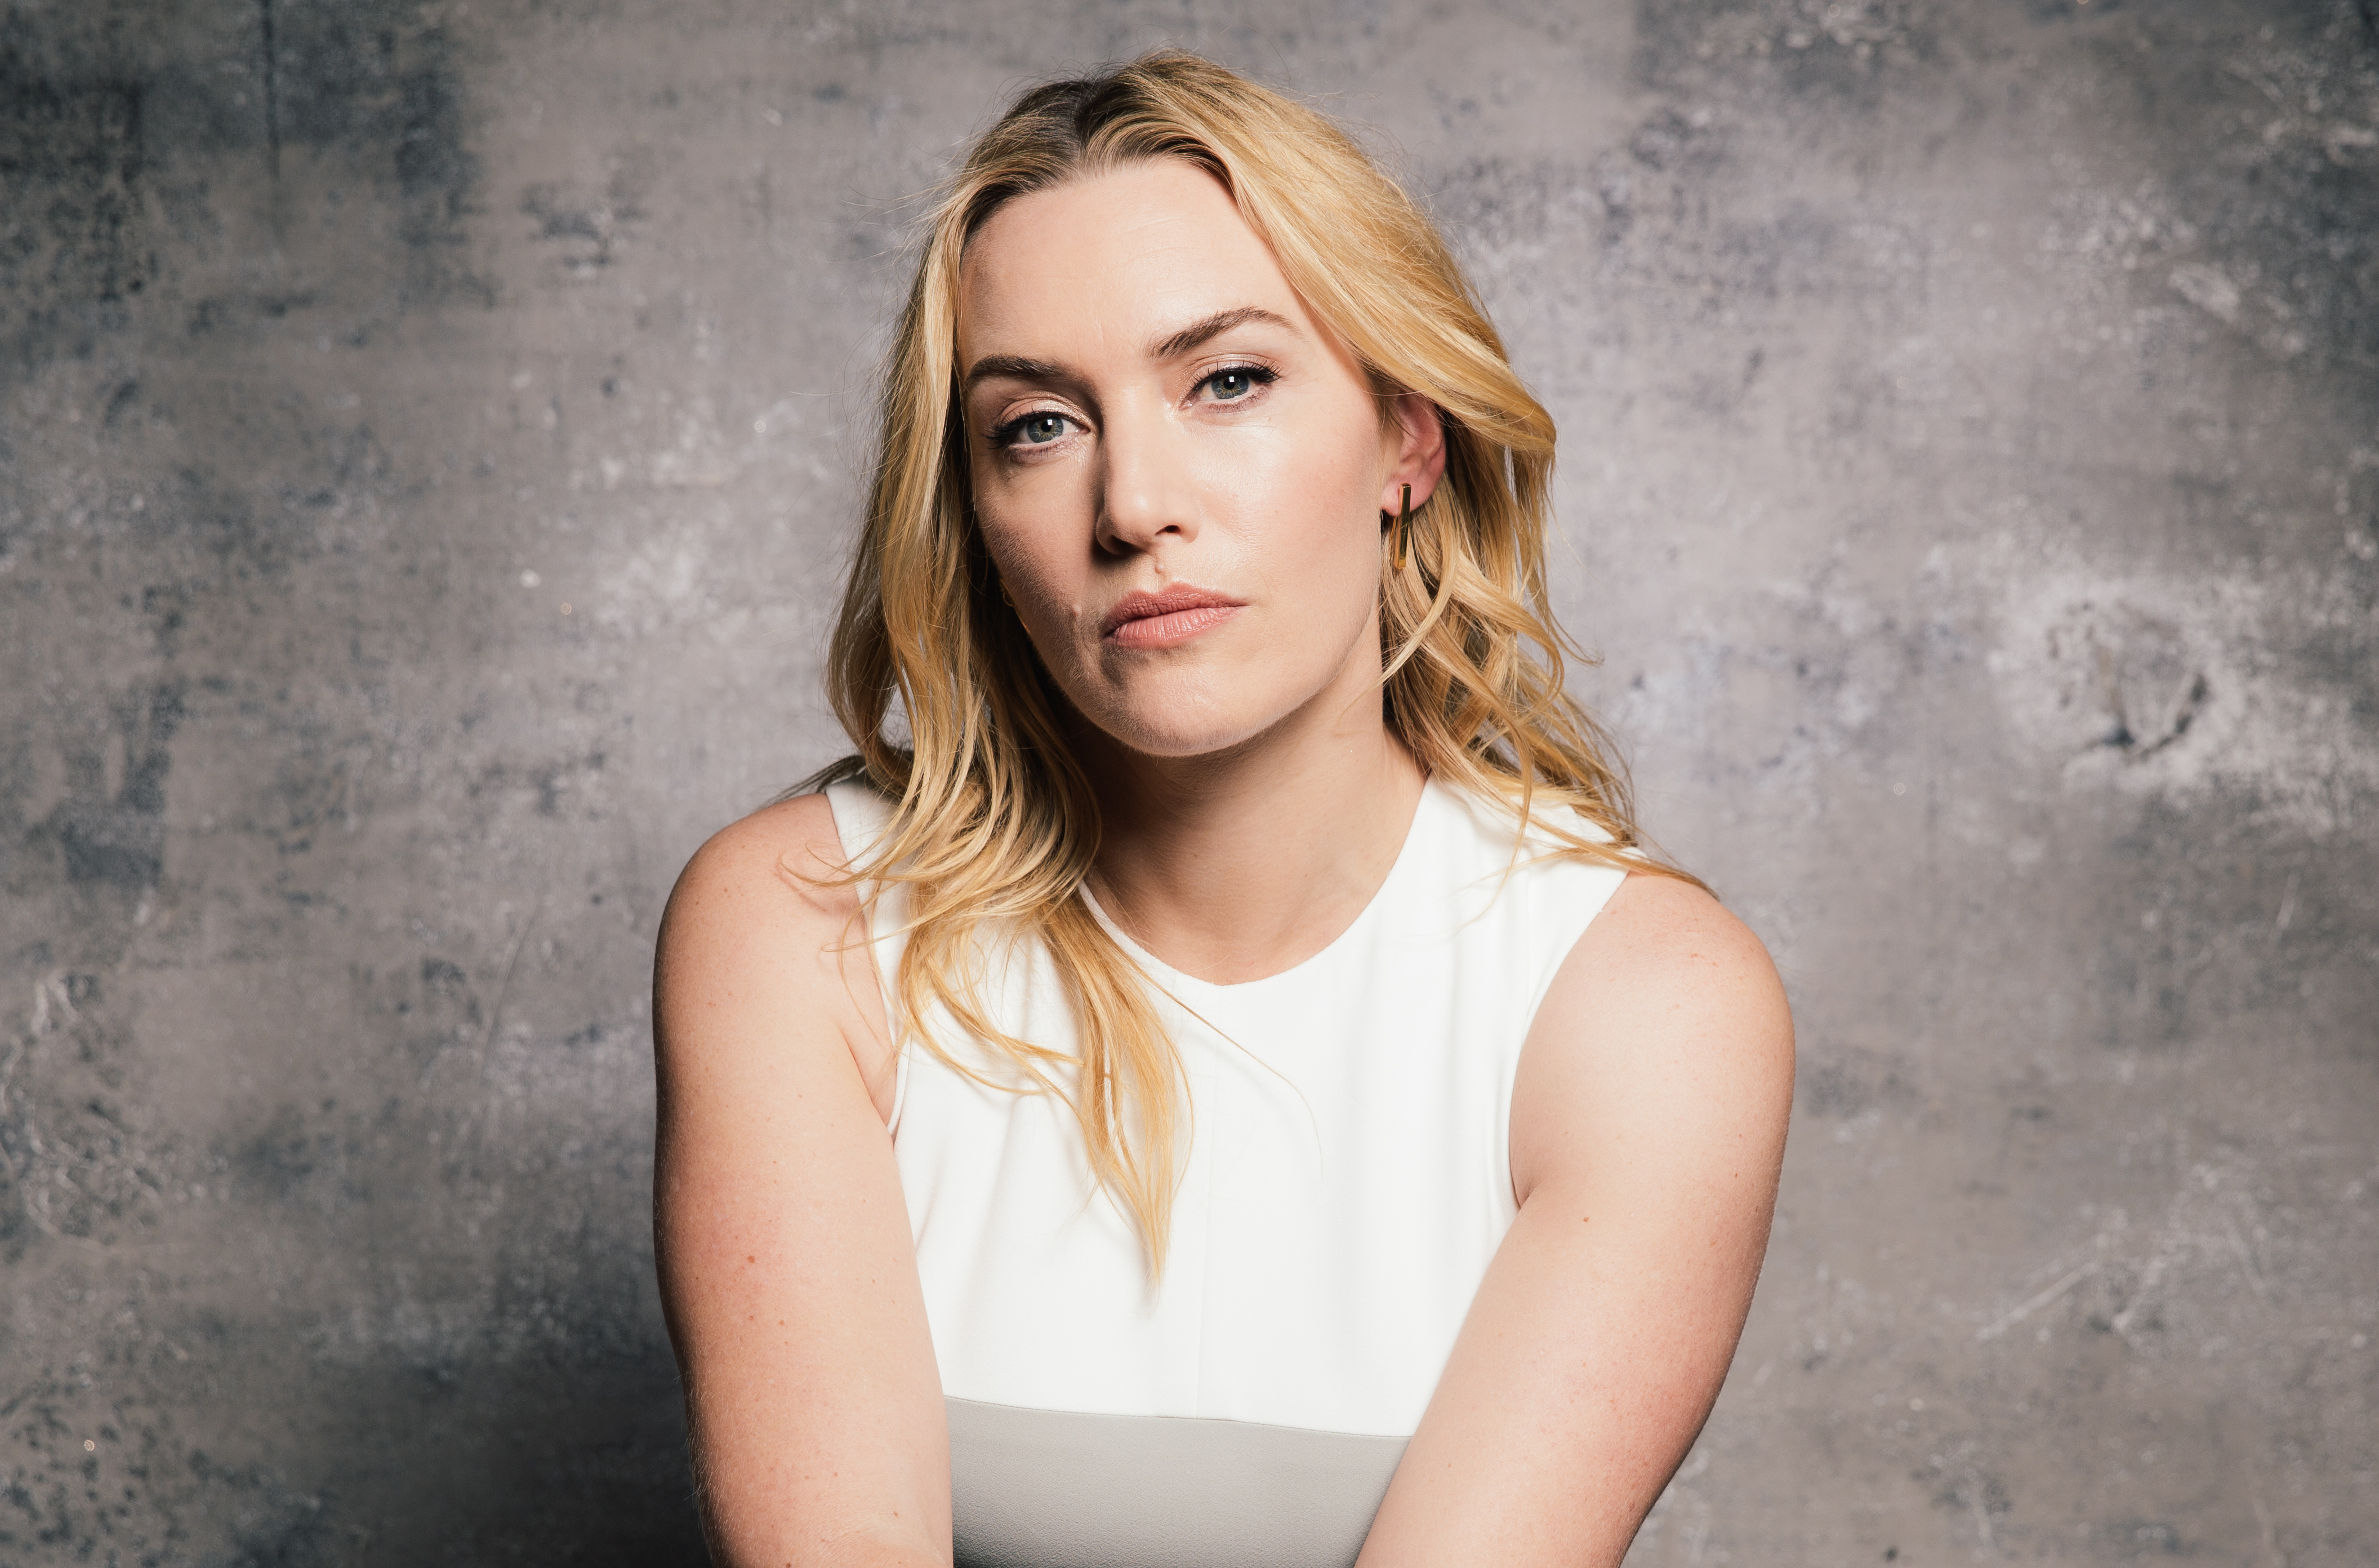 #Over40 Face ~ #KateWinslet #Celebrity #Faces (With images 